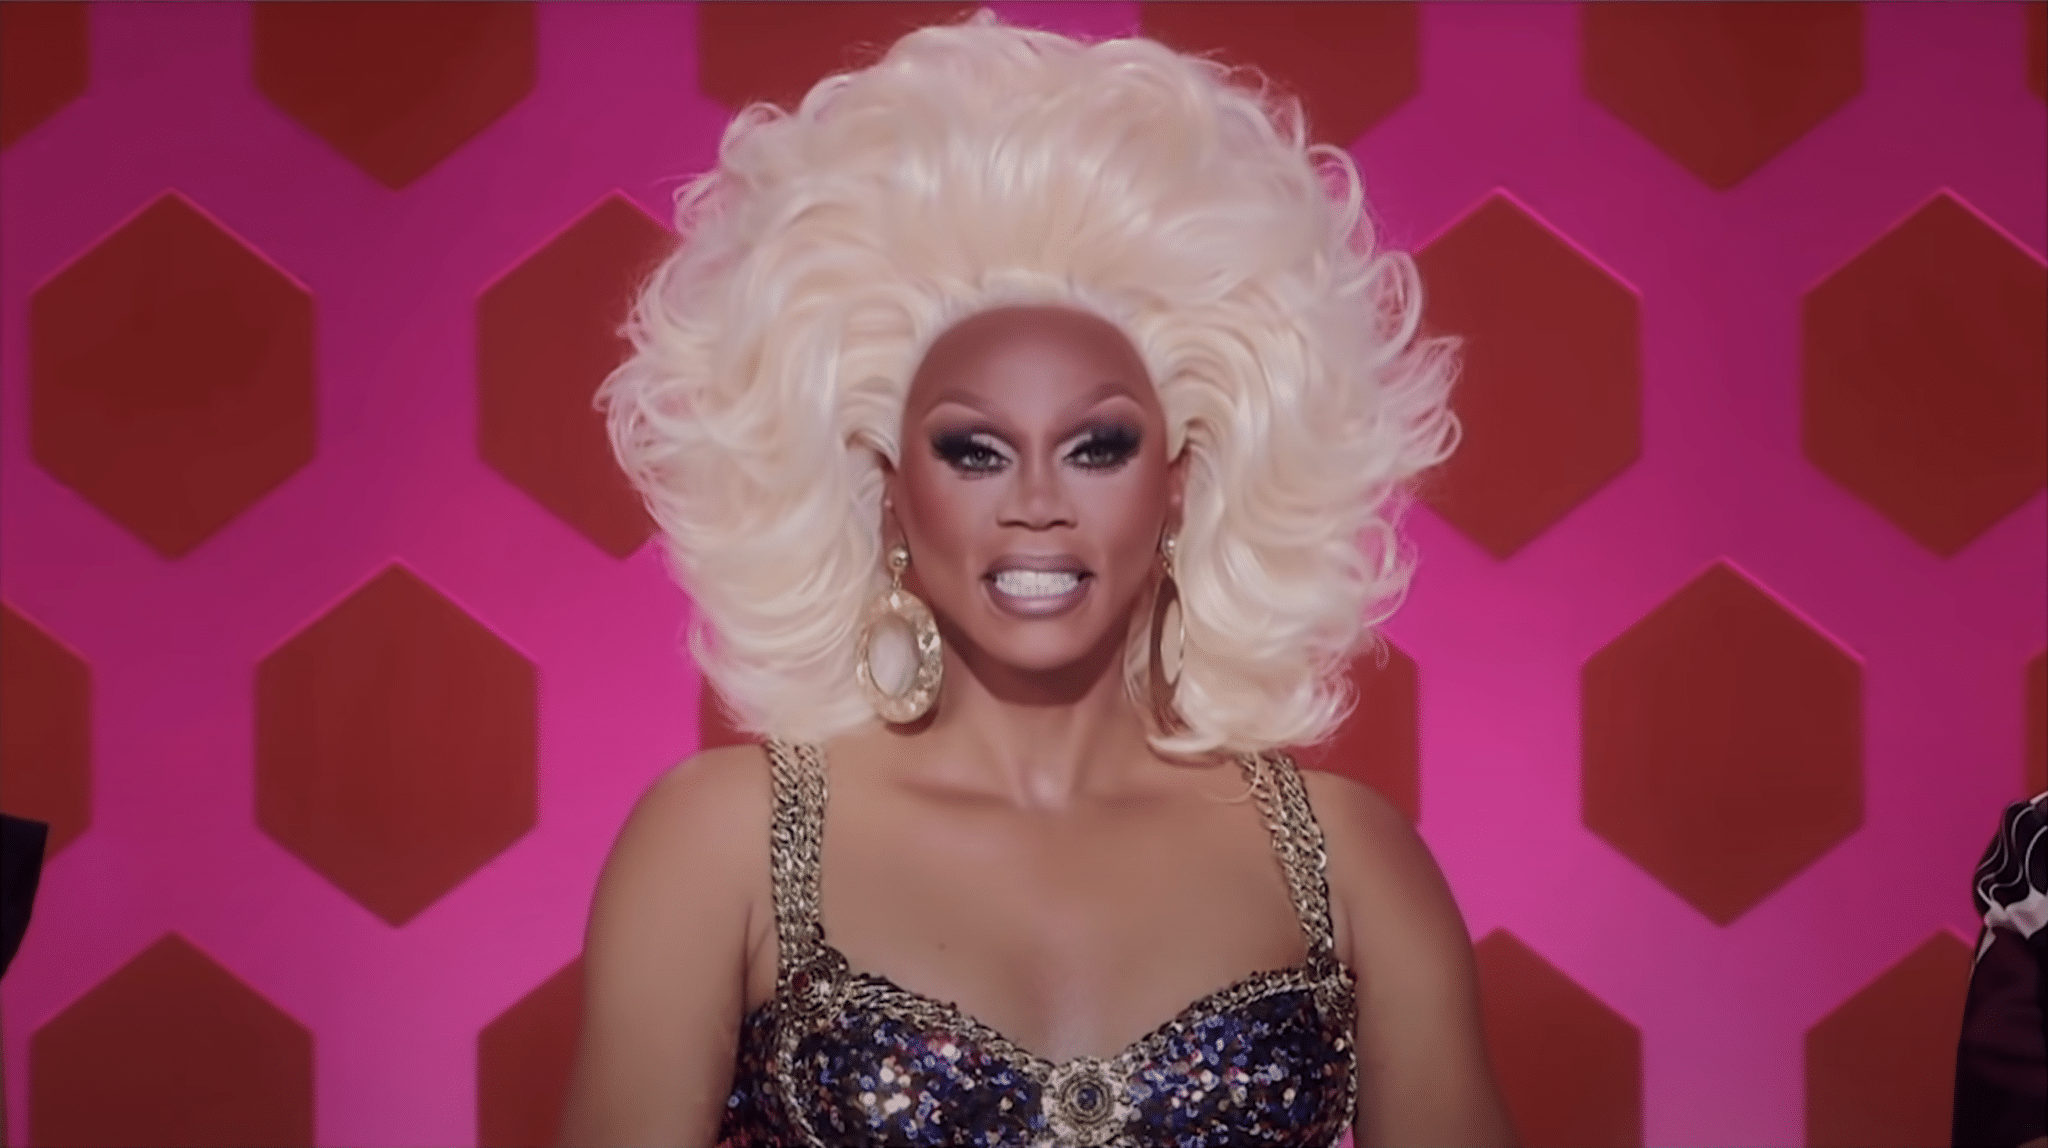 Drag Race royalty announced as judge of new Philippines spin-off